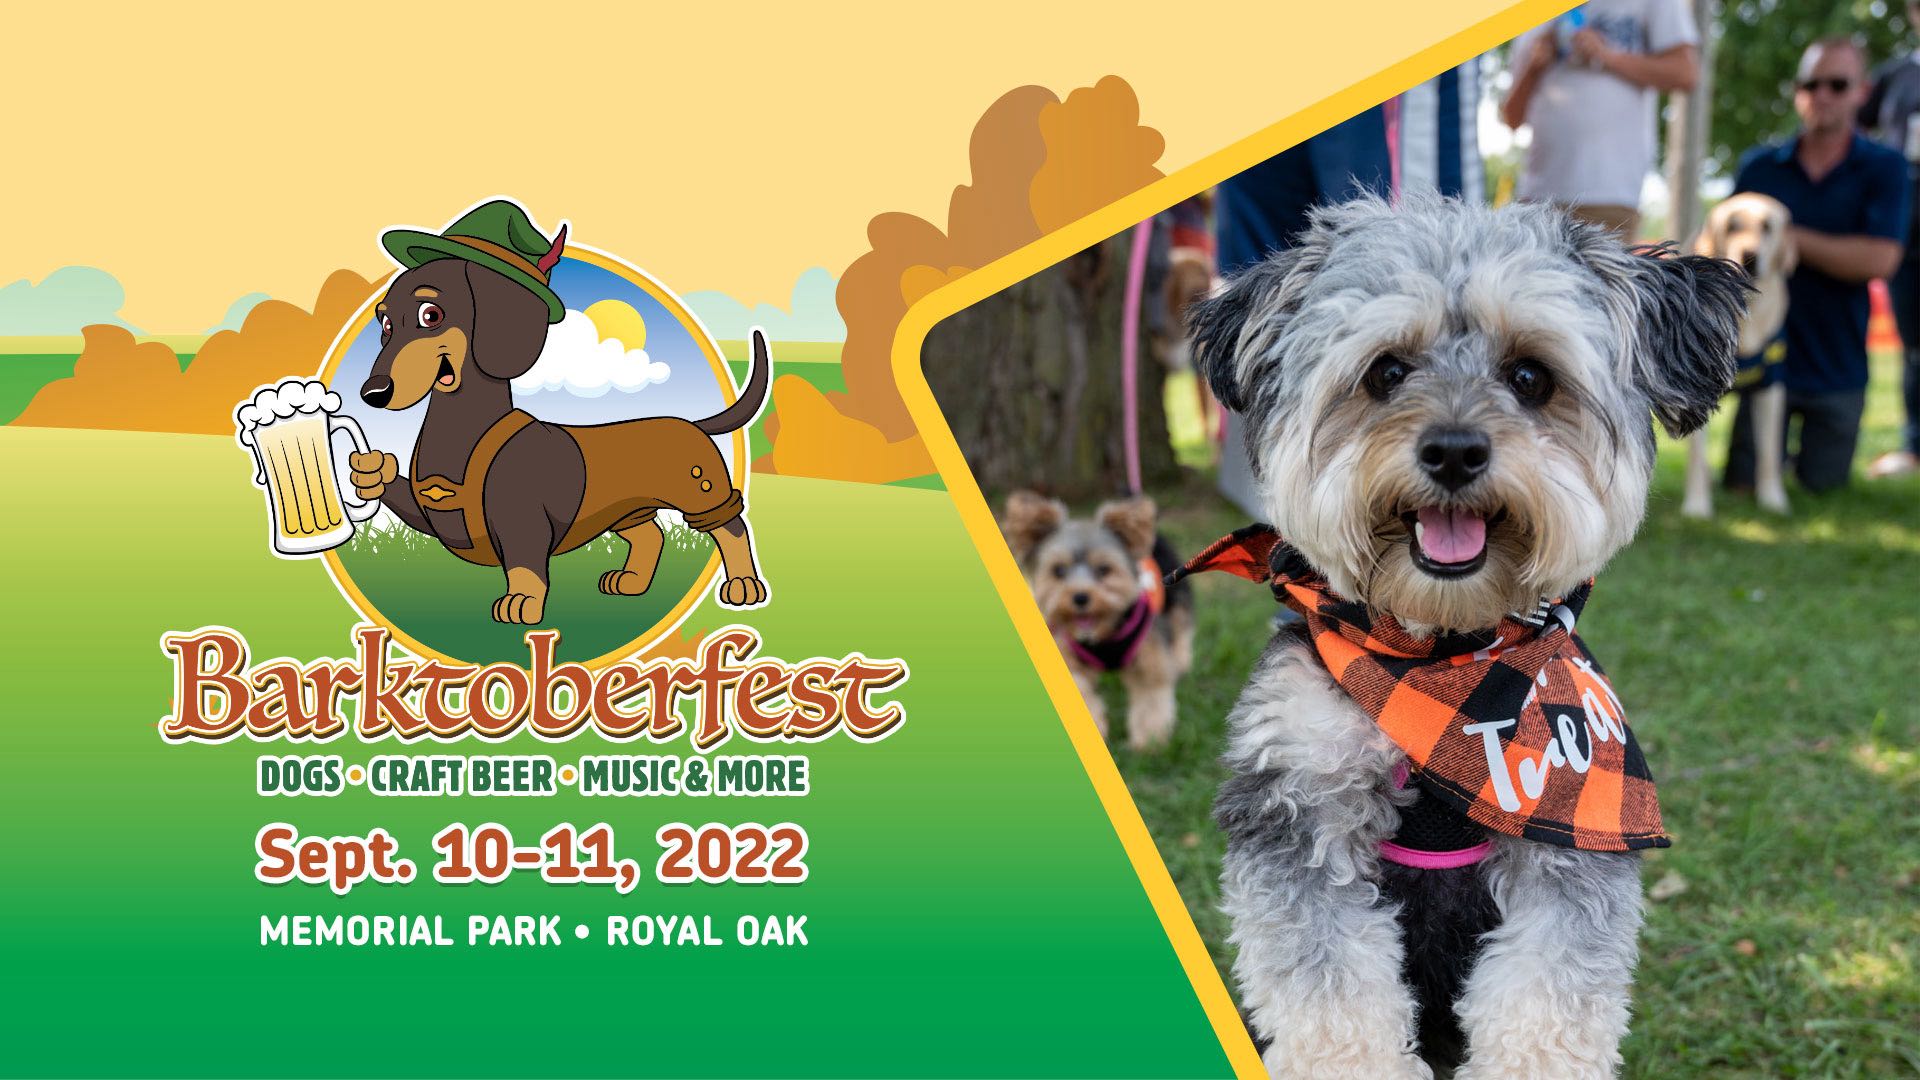 Barktoberfest, Dogs, Craft Beer, Music & More. September 10th and 11th, 2022 at Memorial Park in Royal Oak; featuring image of small dog with a orange checkered bandana